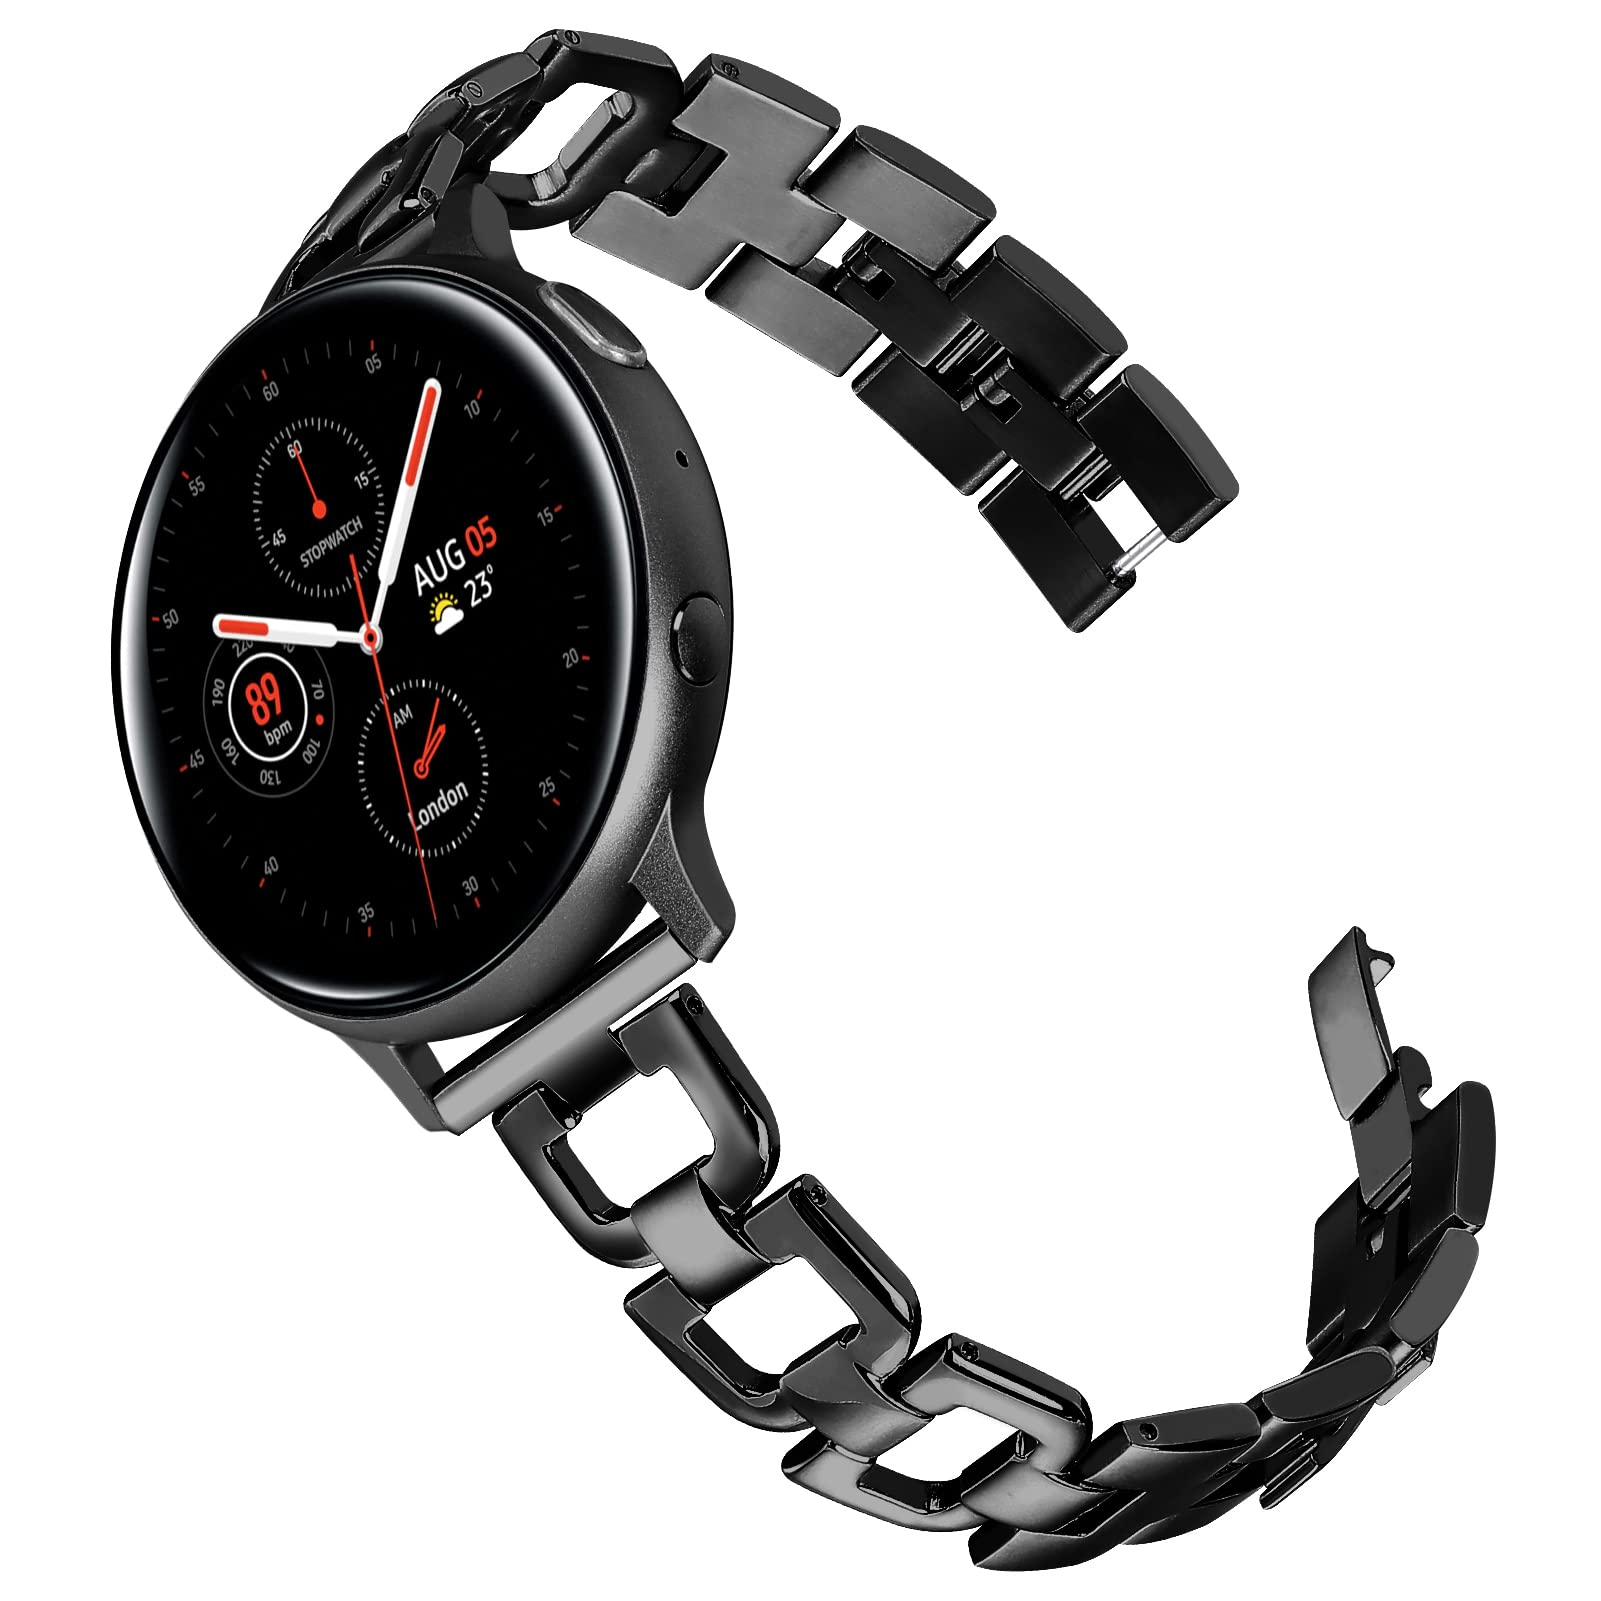 Joyozy Stainless Steel Bands For Galaxy Watch Active 40Mmactive 2 40Mm 44Mm Galaxy Watch 42Mm,Metal D-Chain Band For Galaxy Watc